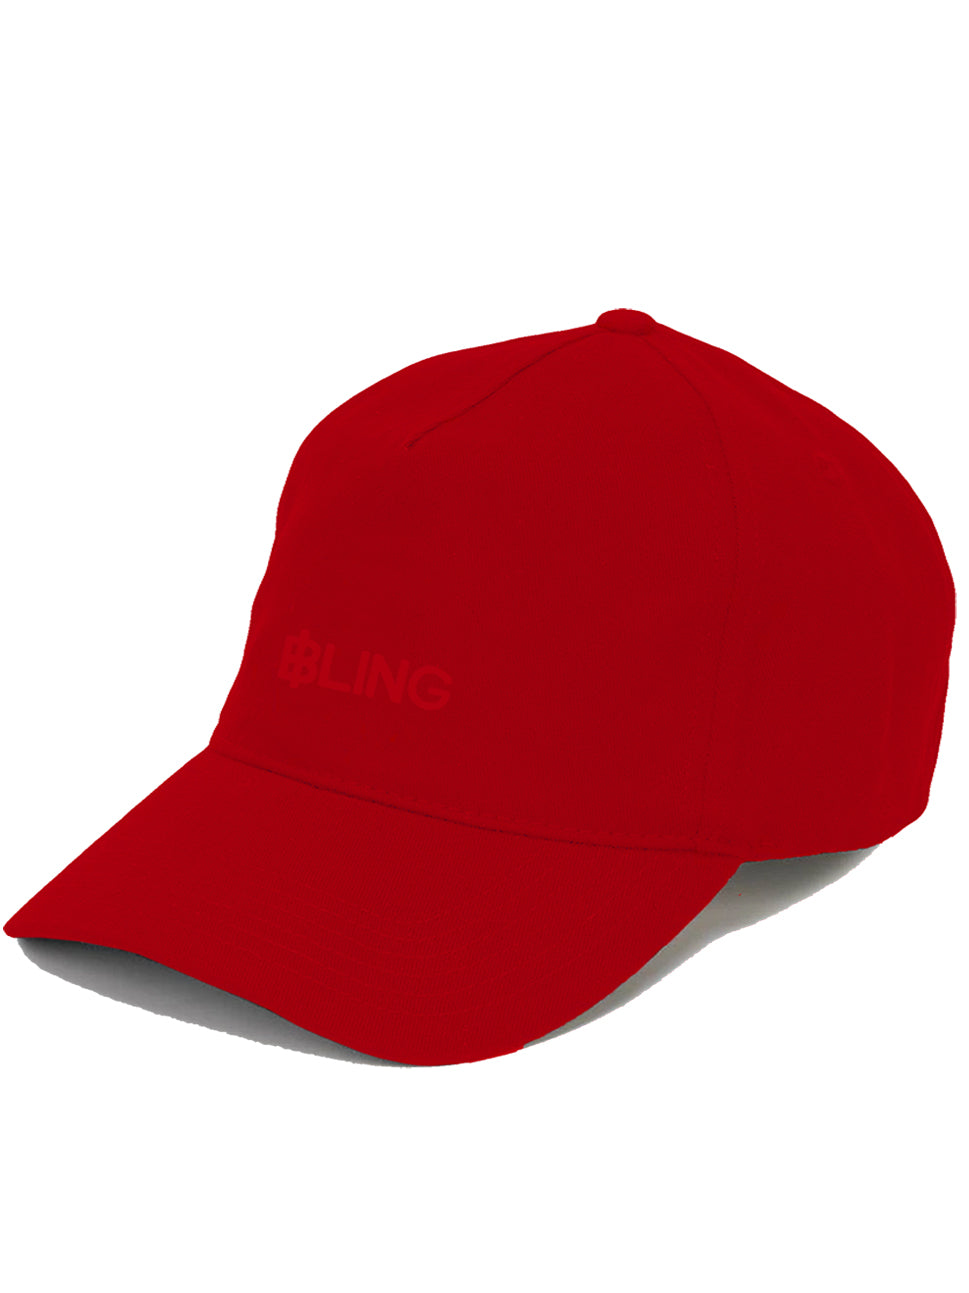 Bling Hat Red BL08BC H01